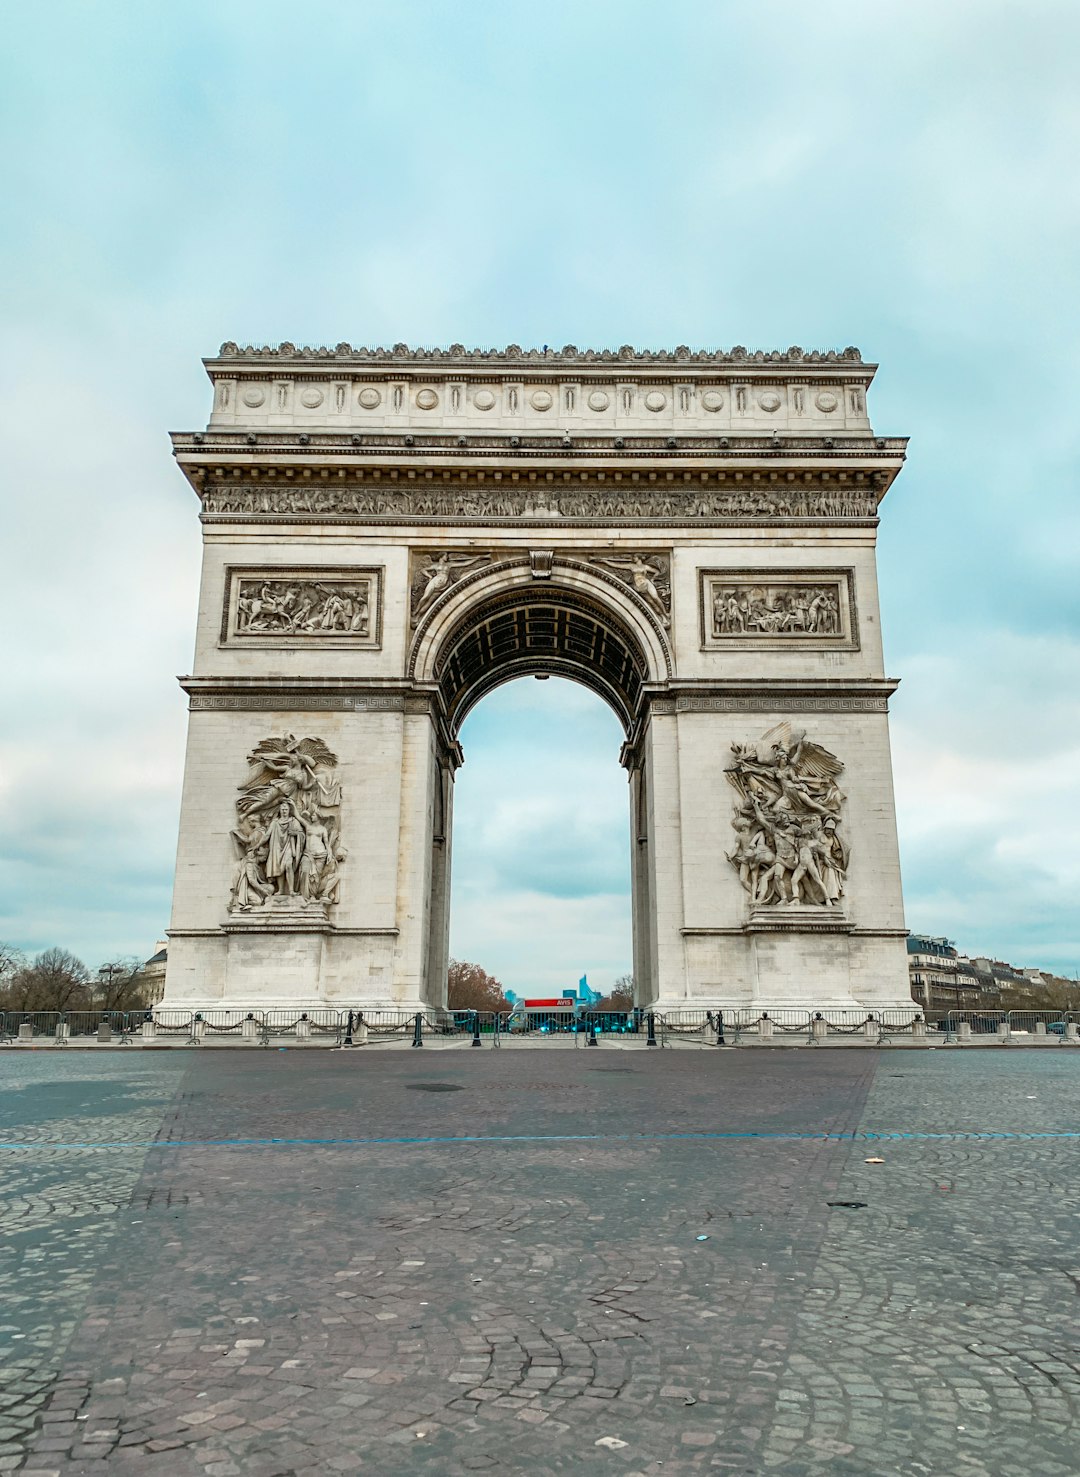 Travel Tips and Stories of Charles de Gaulle - Étoile - Champs-Elysees in France